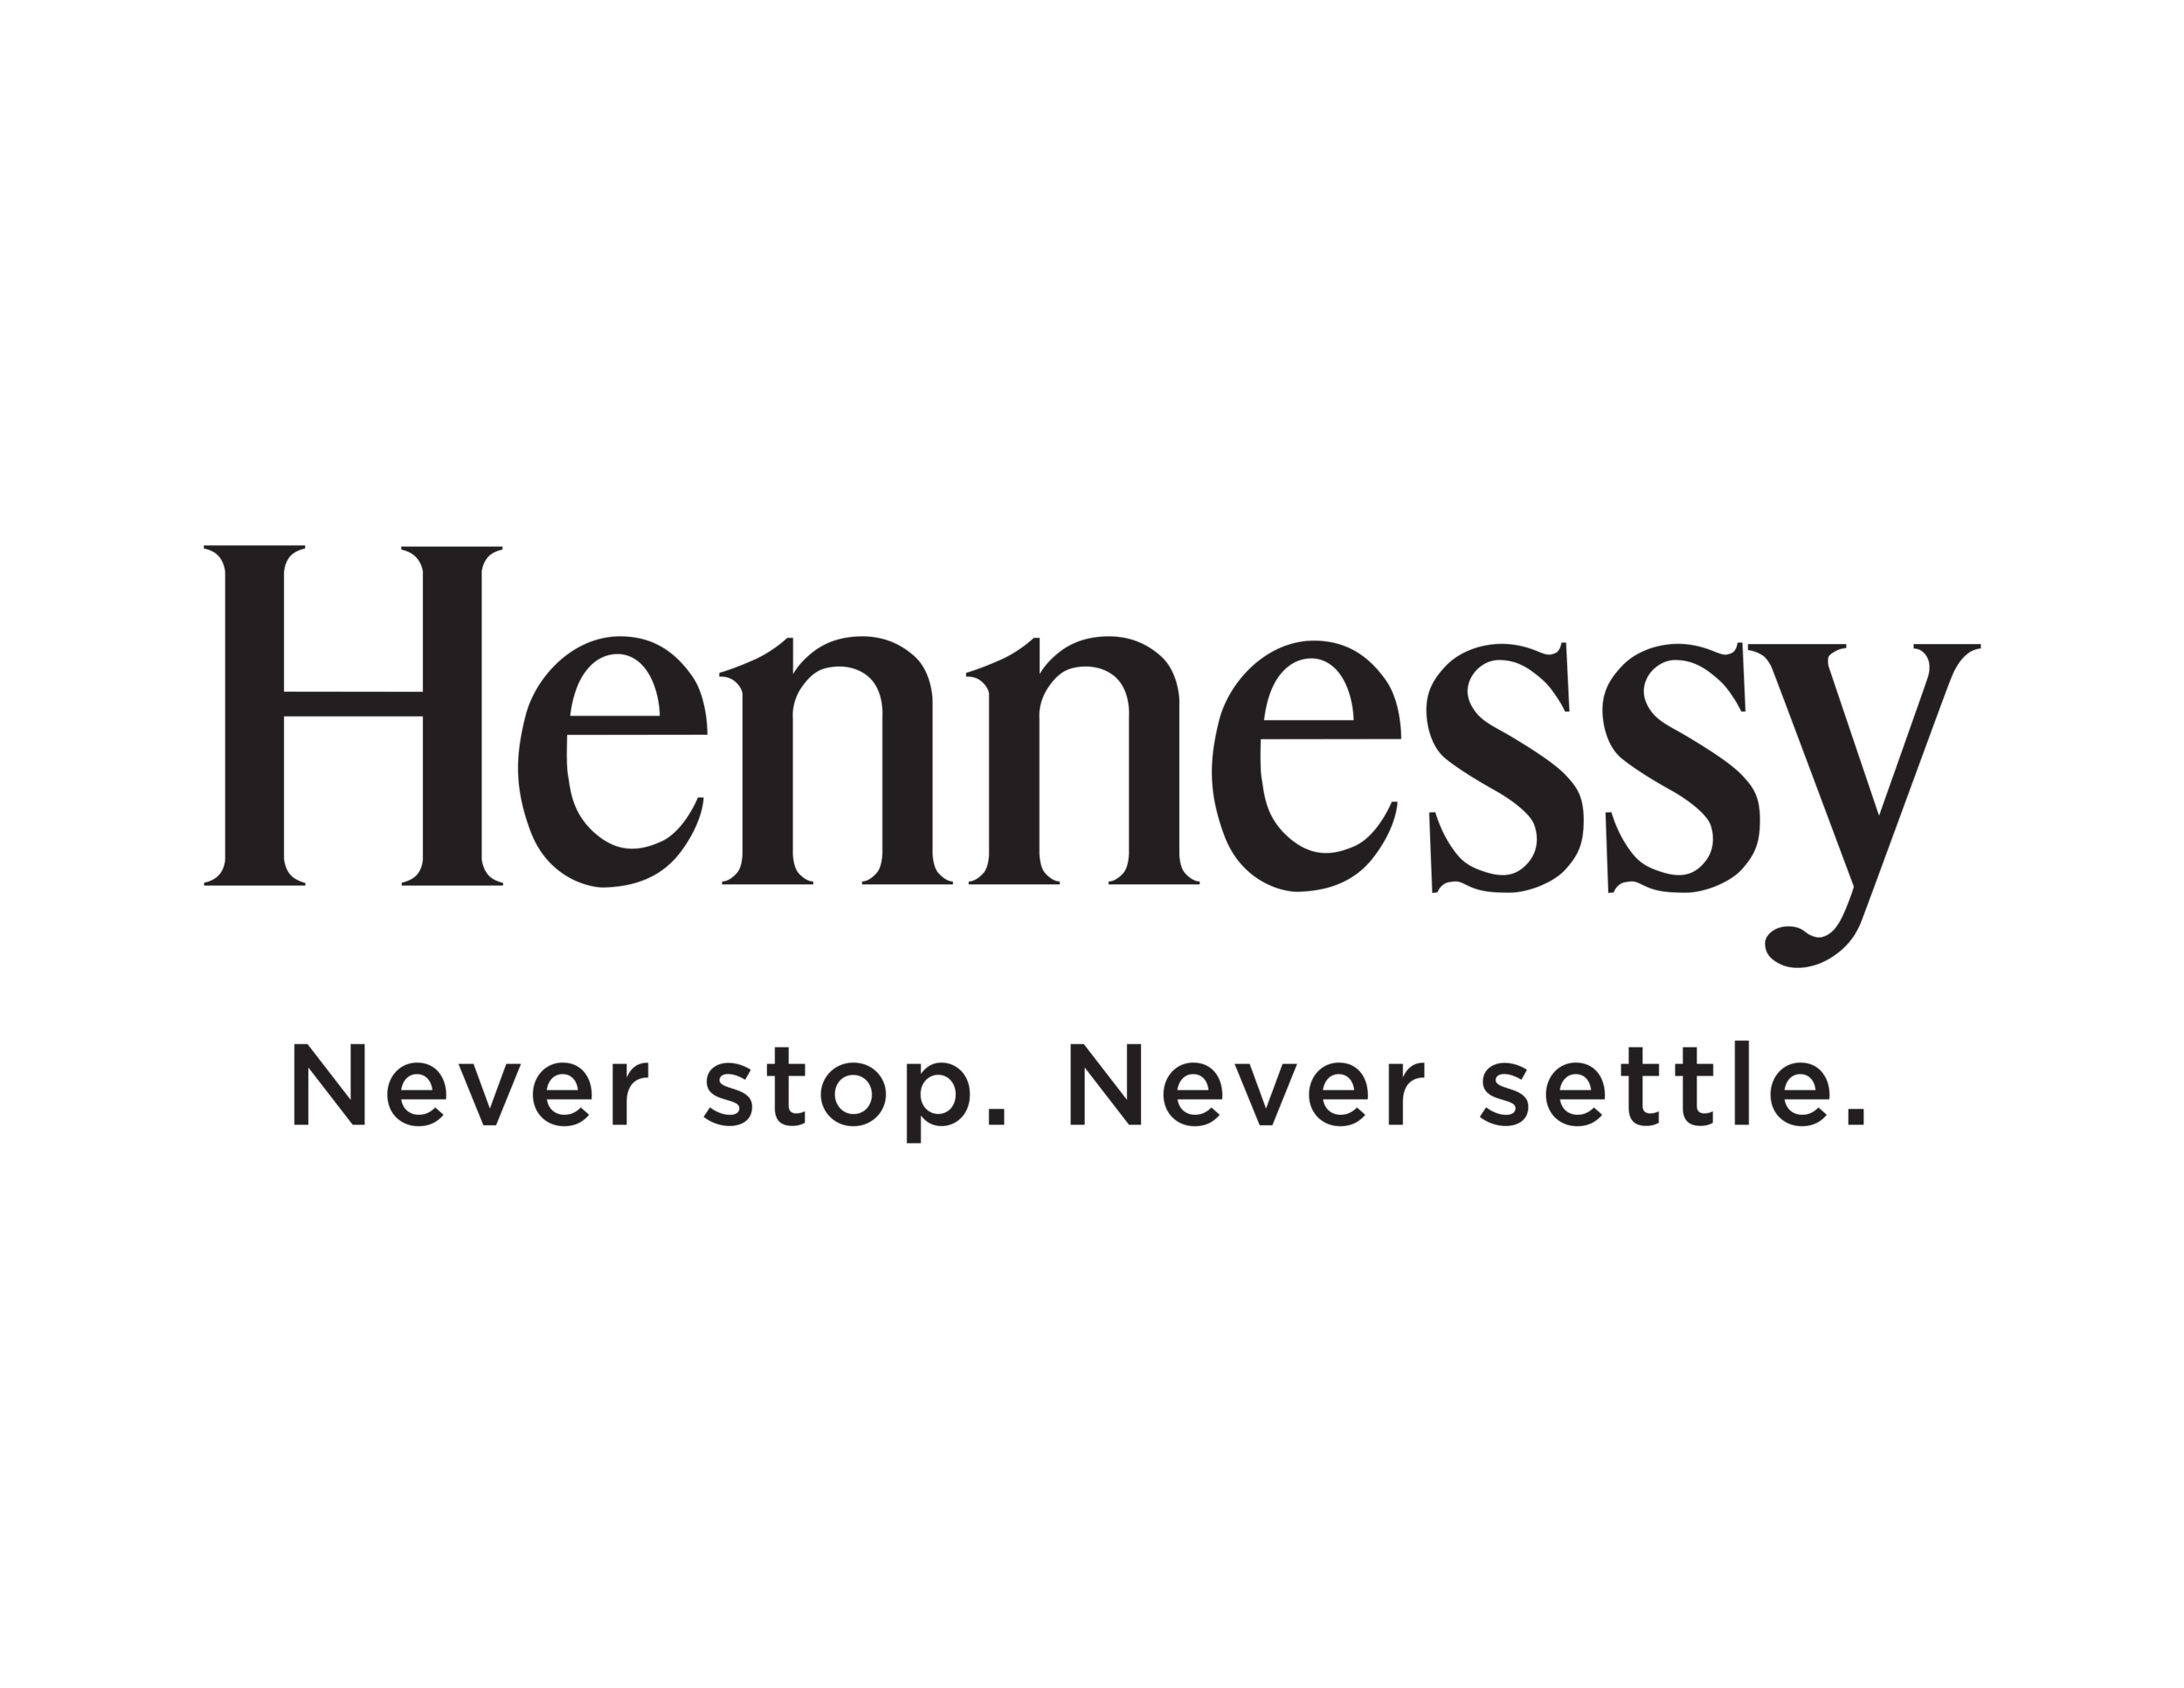 Hennessy_nsns_bk PNG.png